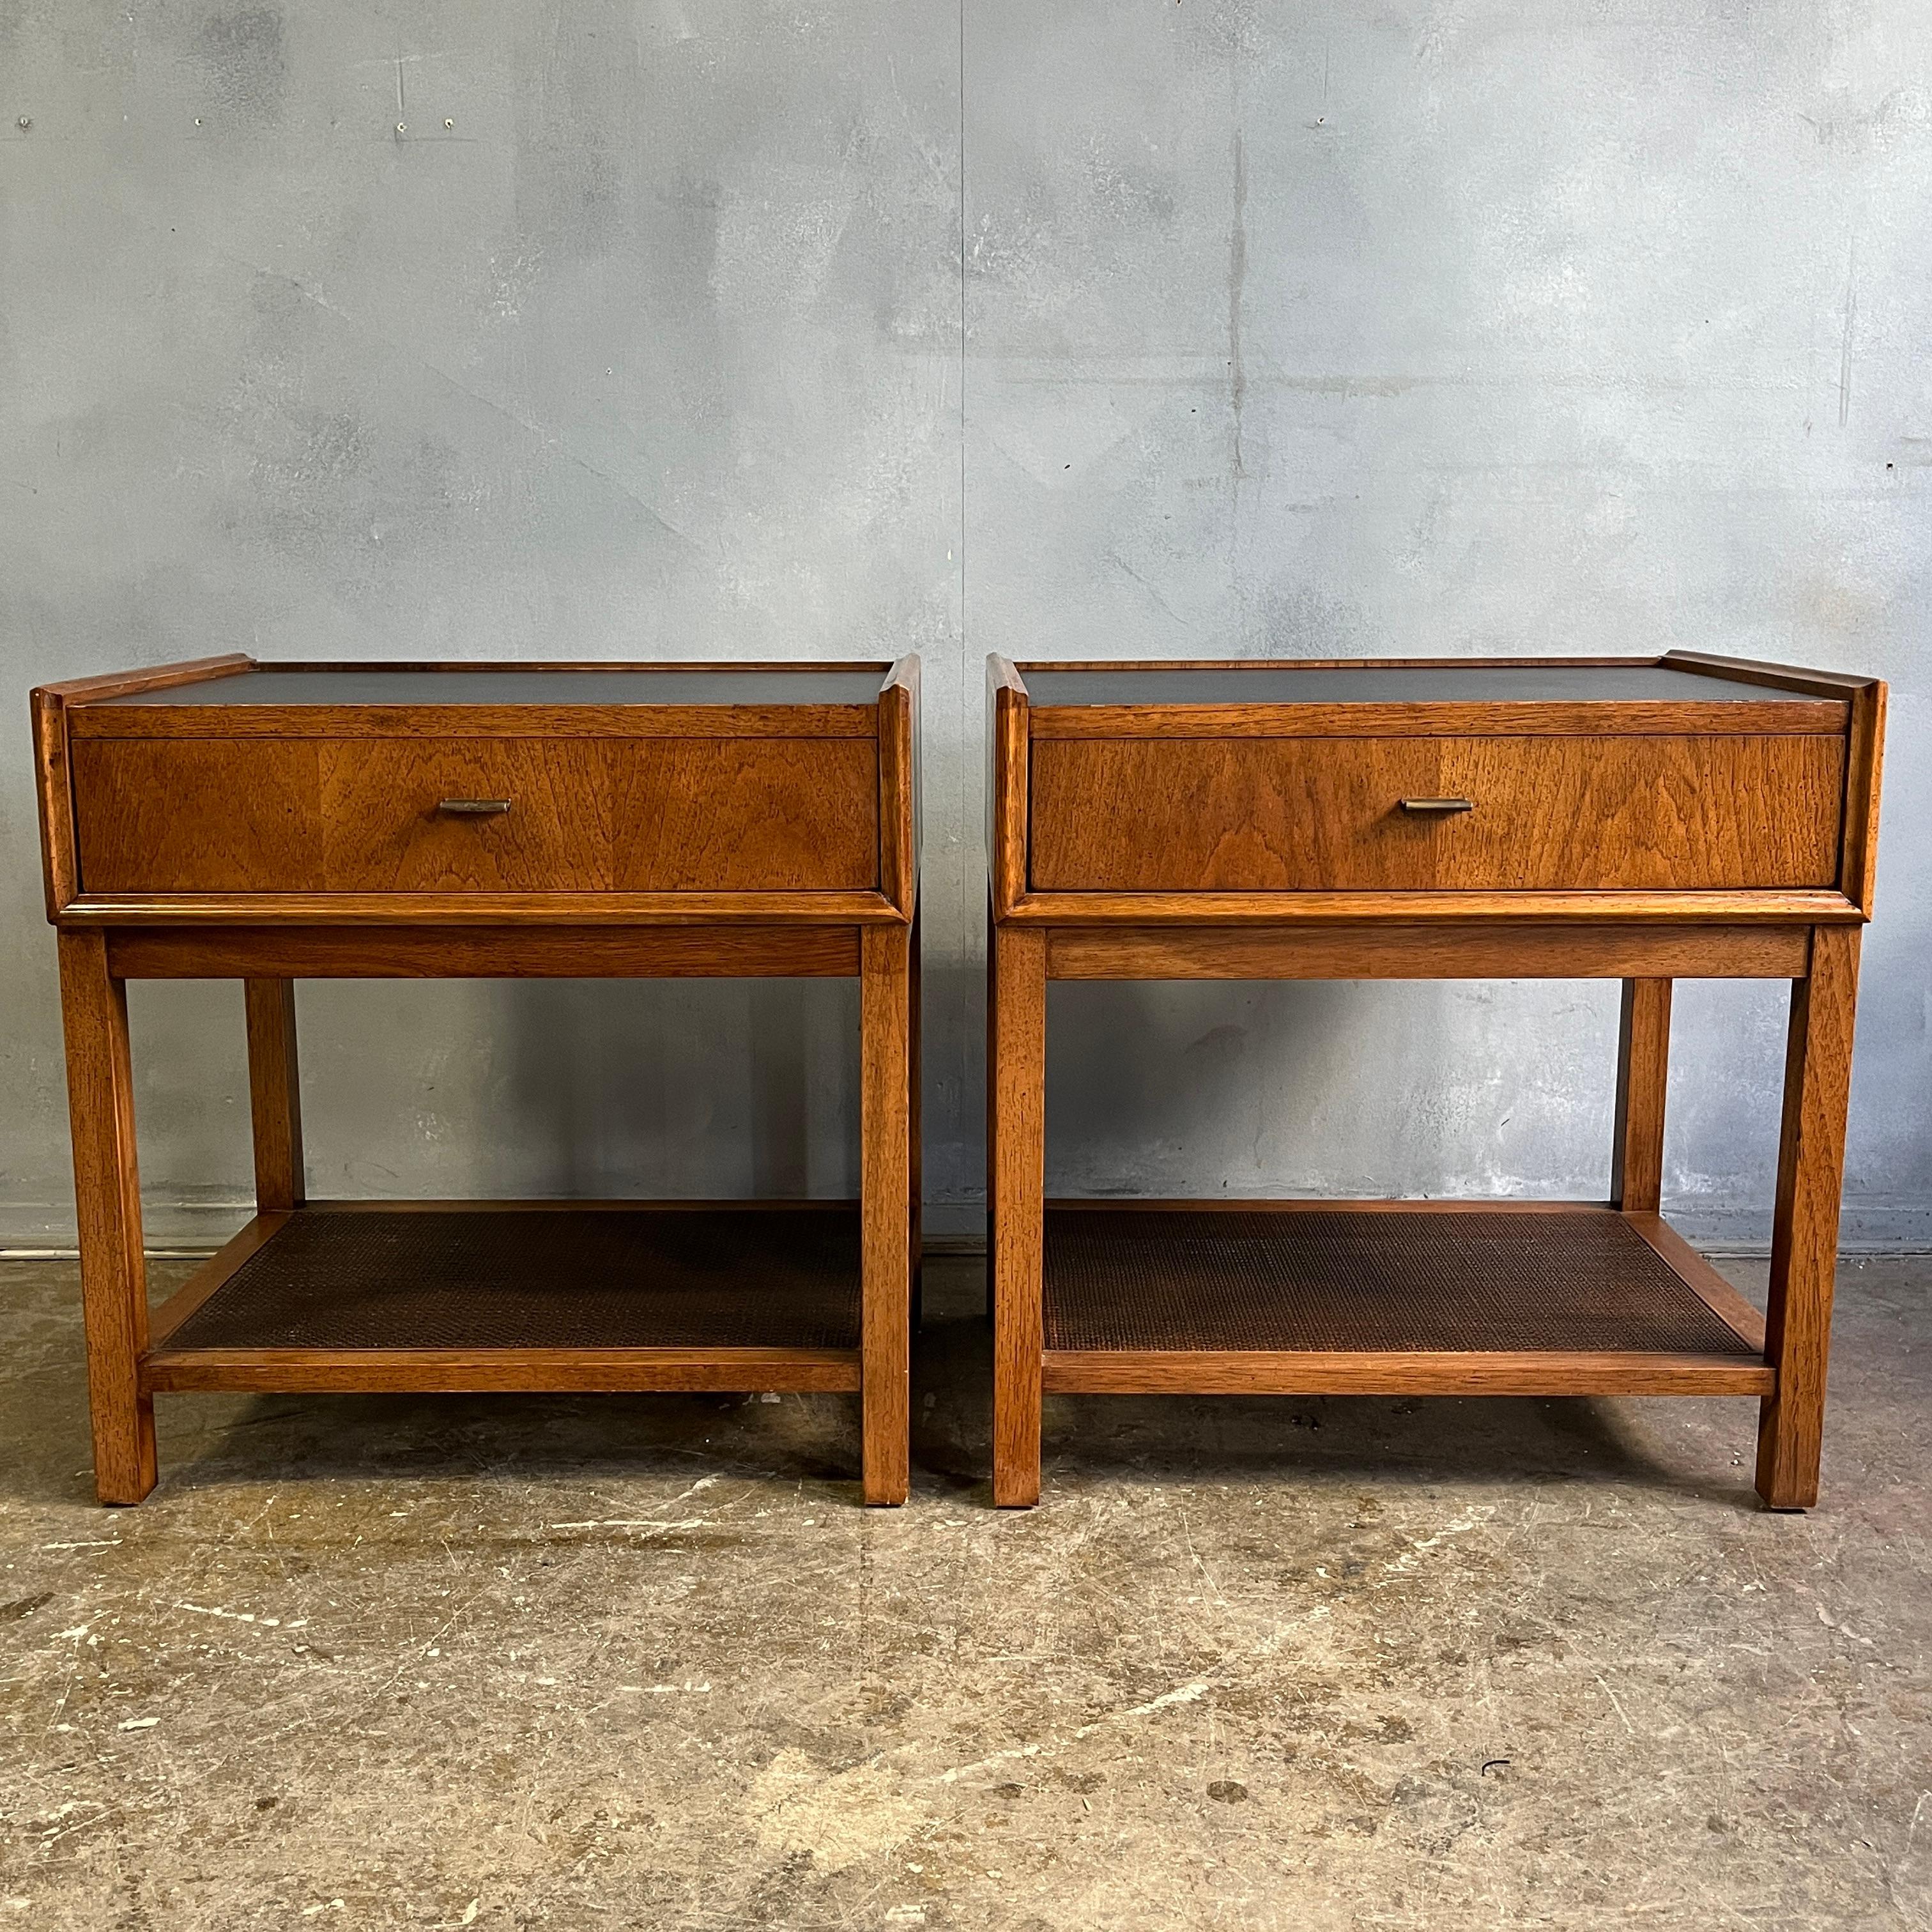 Beautiful and rare pair of nightstands / end tables designed by Jack Cartwright. Solid wood construction with brass pulls, cane shelf and grained leather top. Very solid and incredibly well crafted. In near flawless condition showing little use.